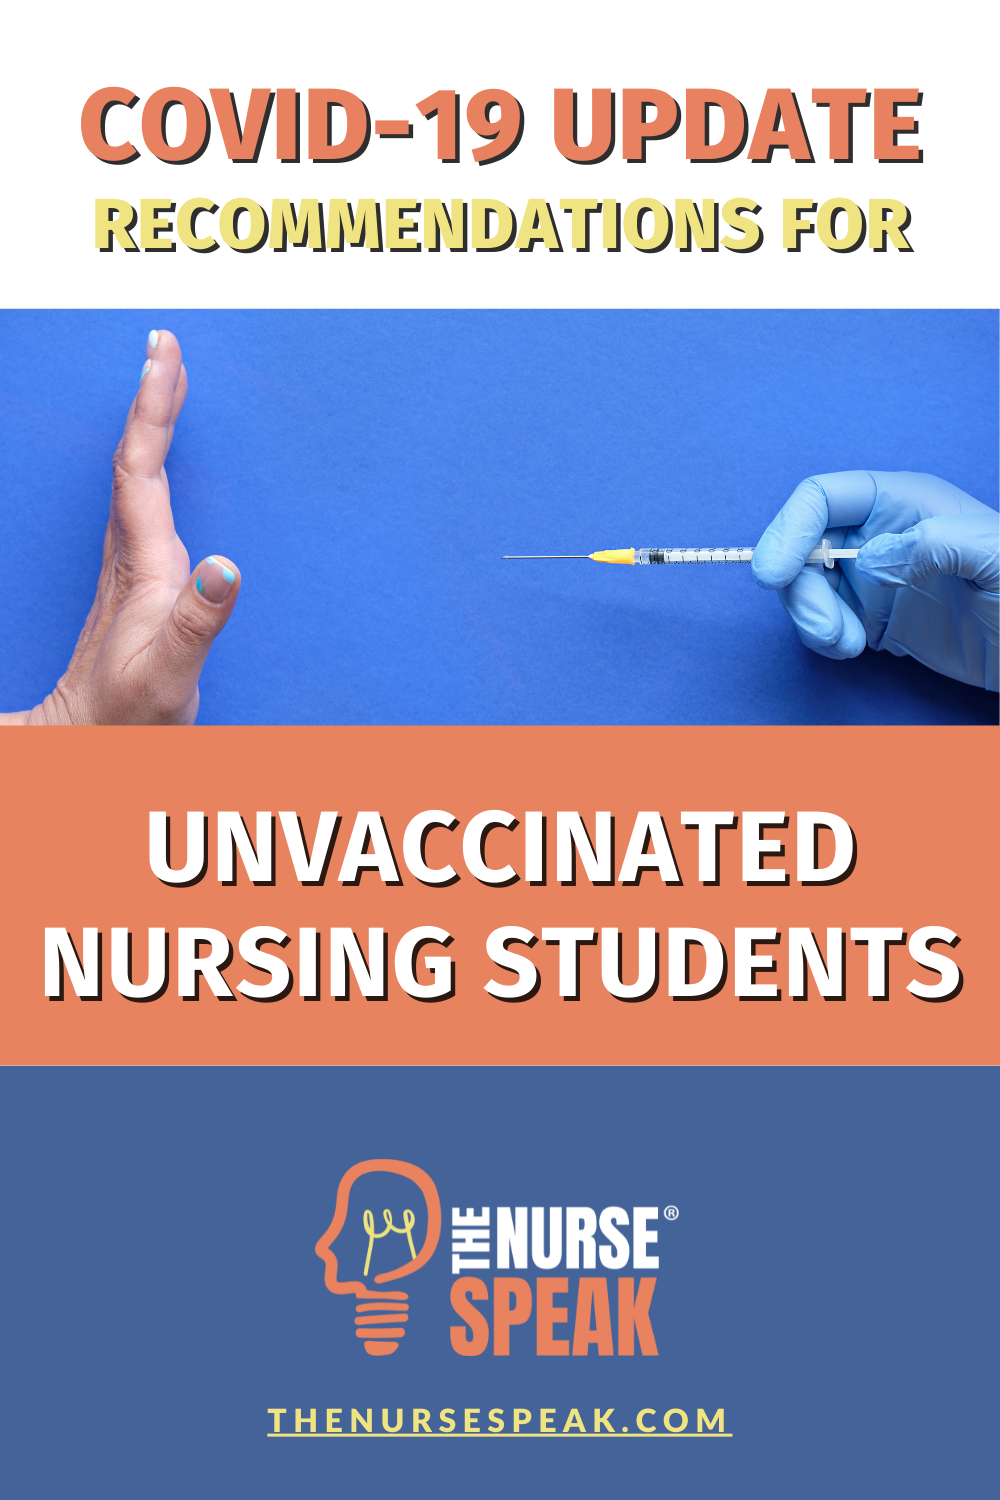 COVID-19 Update: Recommendations for Unvaccinated Nursing Students